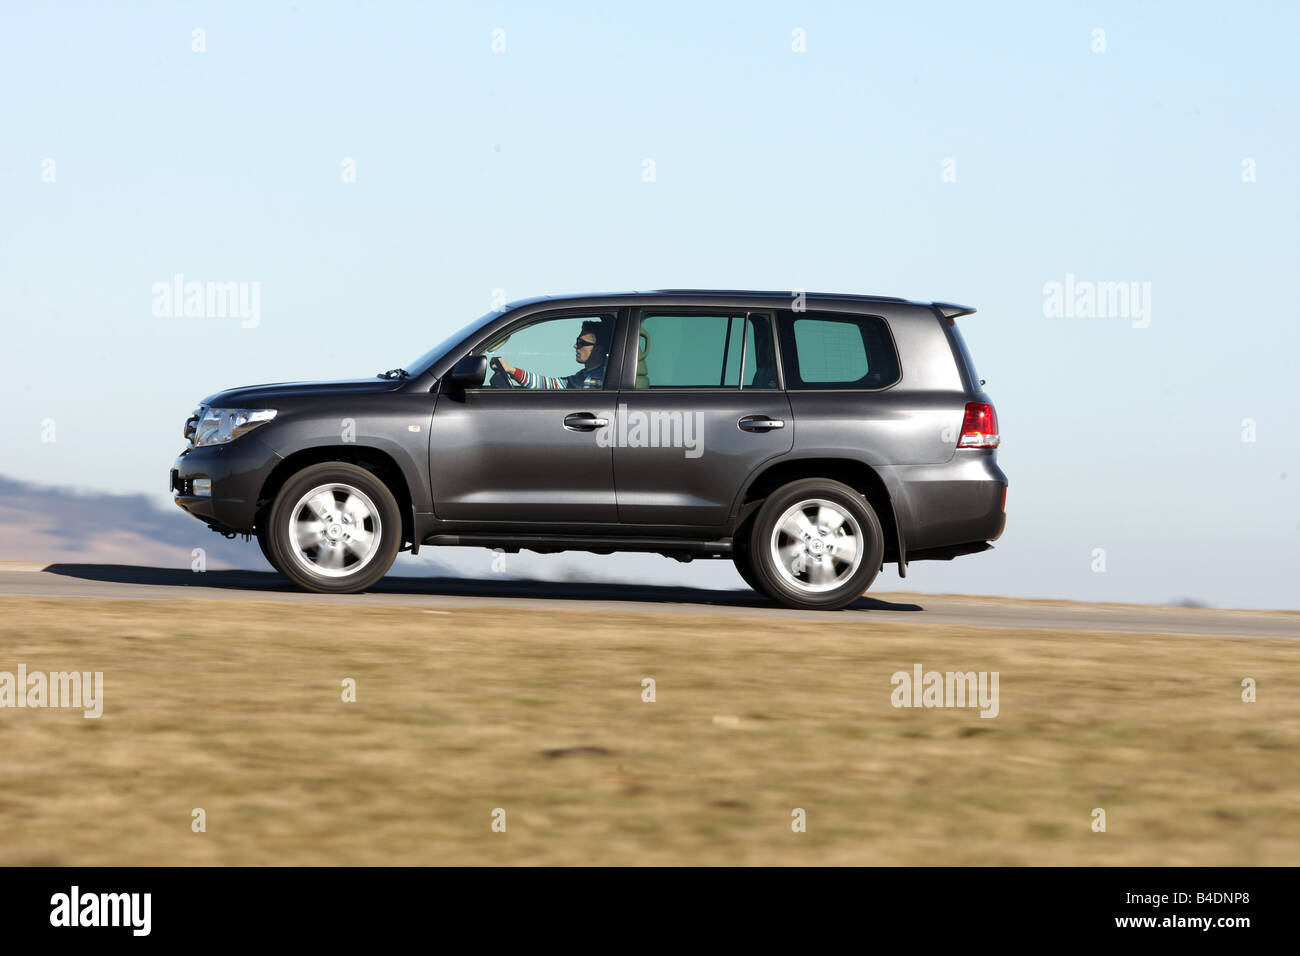 Toyota Landcruiser V8 4.5 D-4D, model year 2008-, anthracite, driving, side view, country road Stock Photo